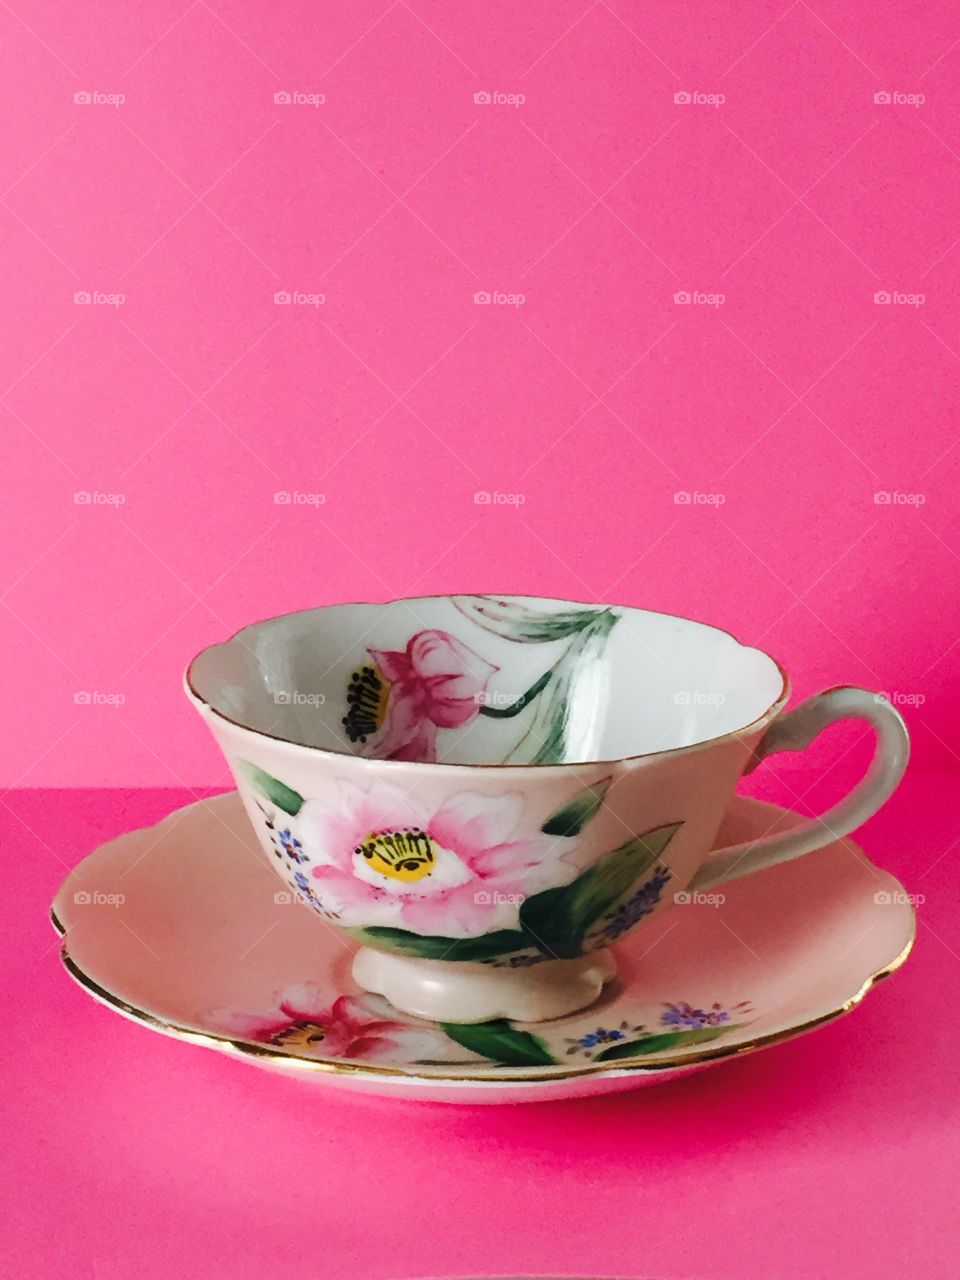 Empty cup and saucer